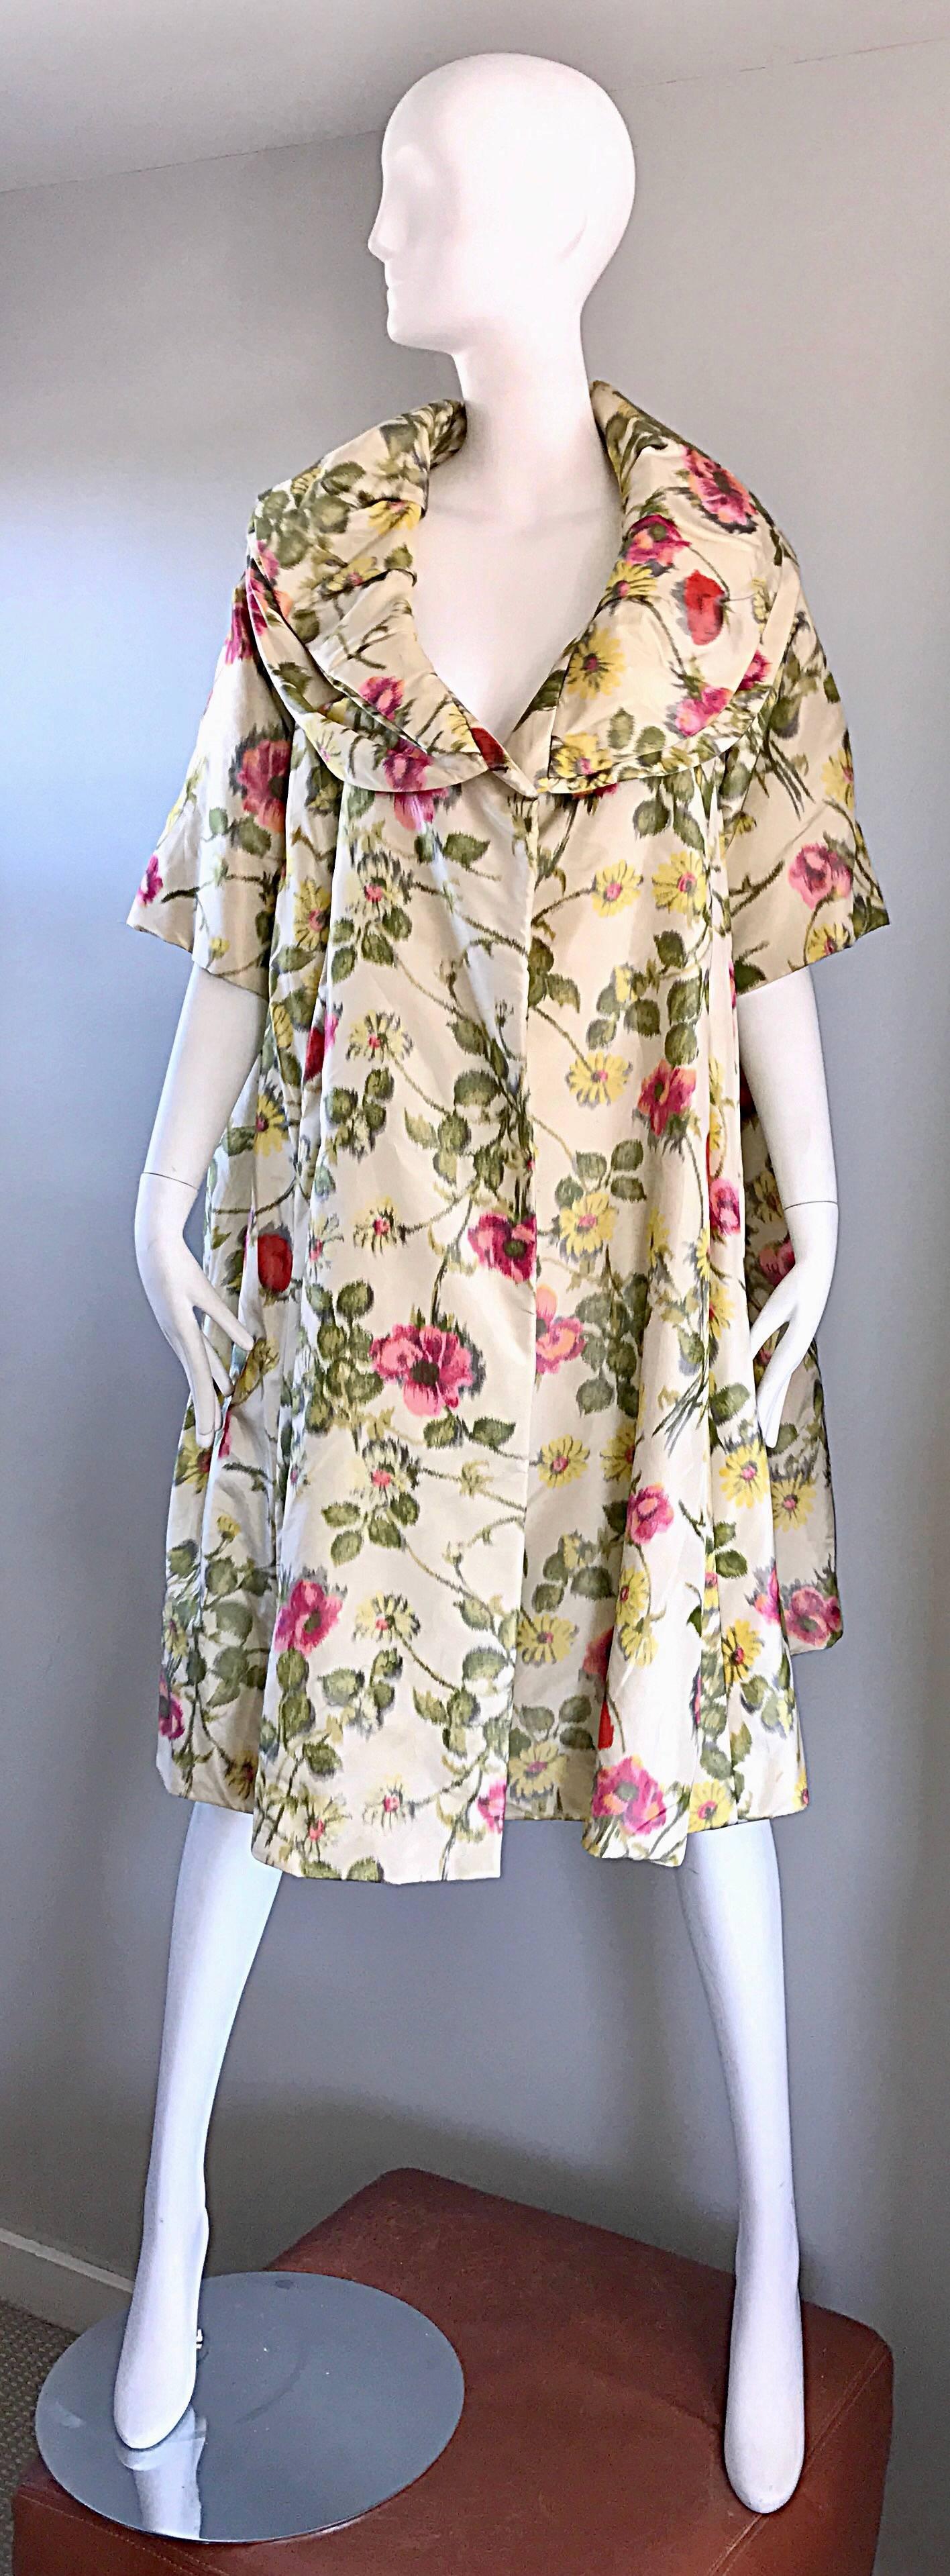 Beautiful late 50s LILLIE RUBIN silk opera jacket! Features roses and flowers in pink, yellow and green throughout, with ivory background. 3/4 sleeves, with a multiple layered collar. Fully lined. A classic gem that looks amazing on, and can fit an